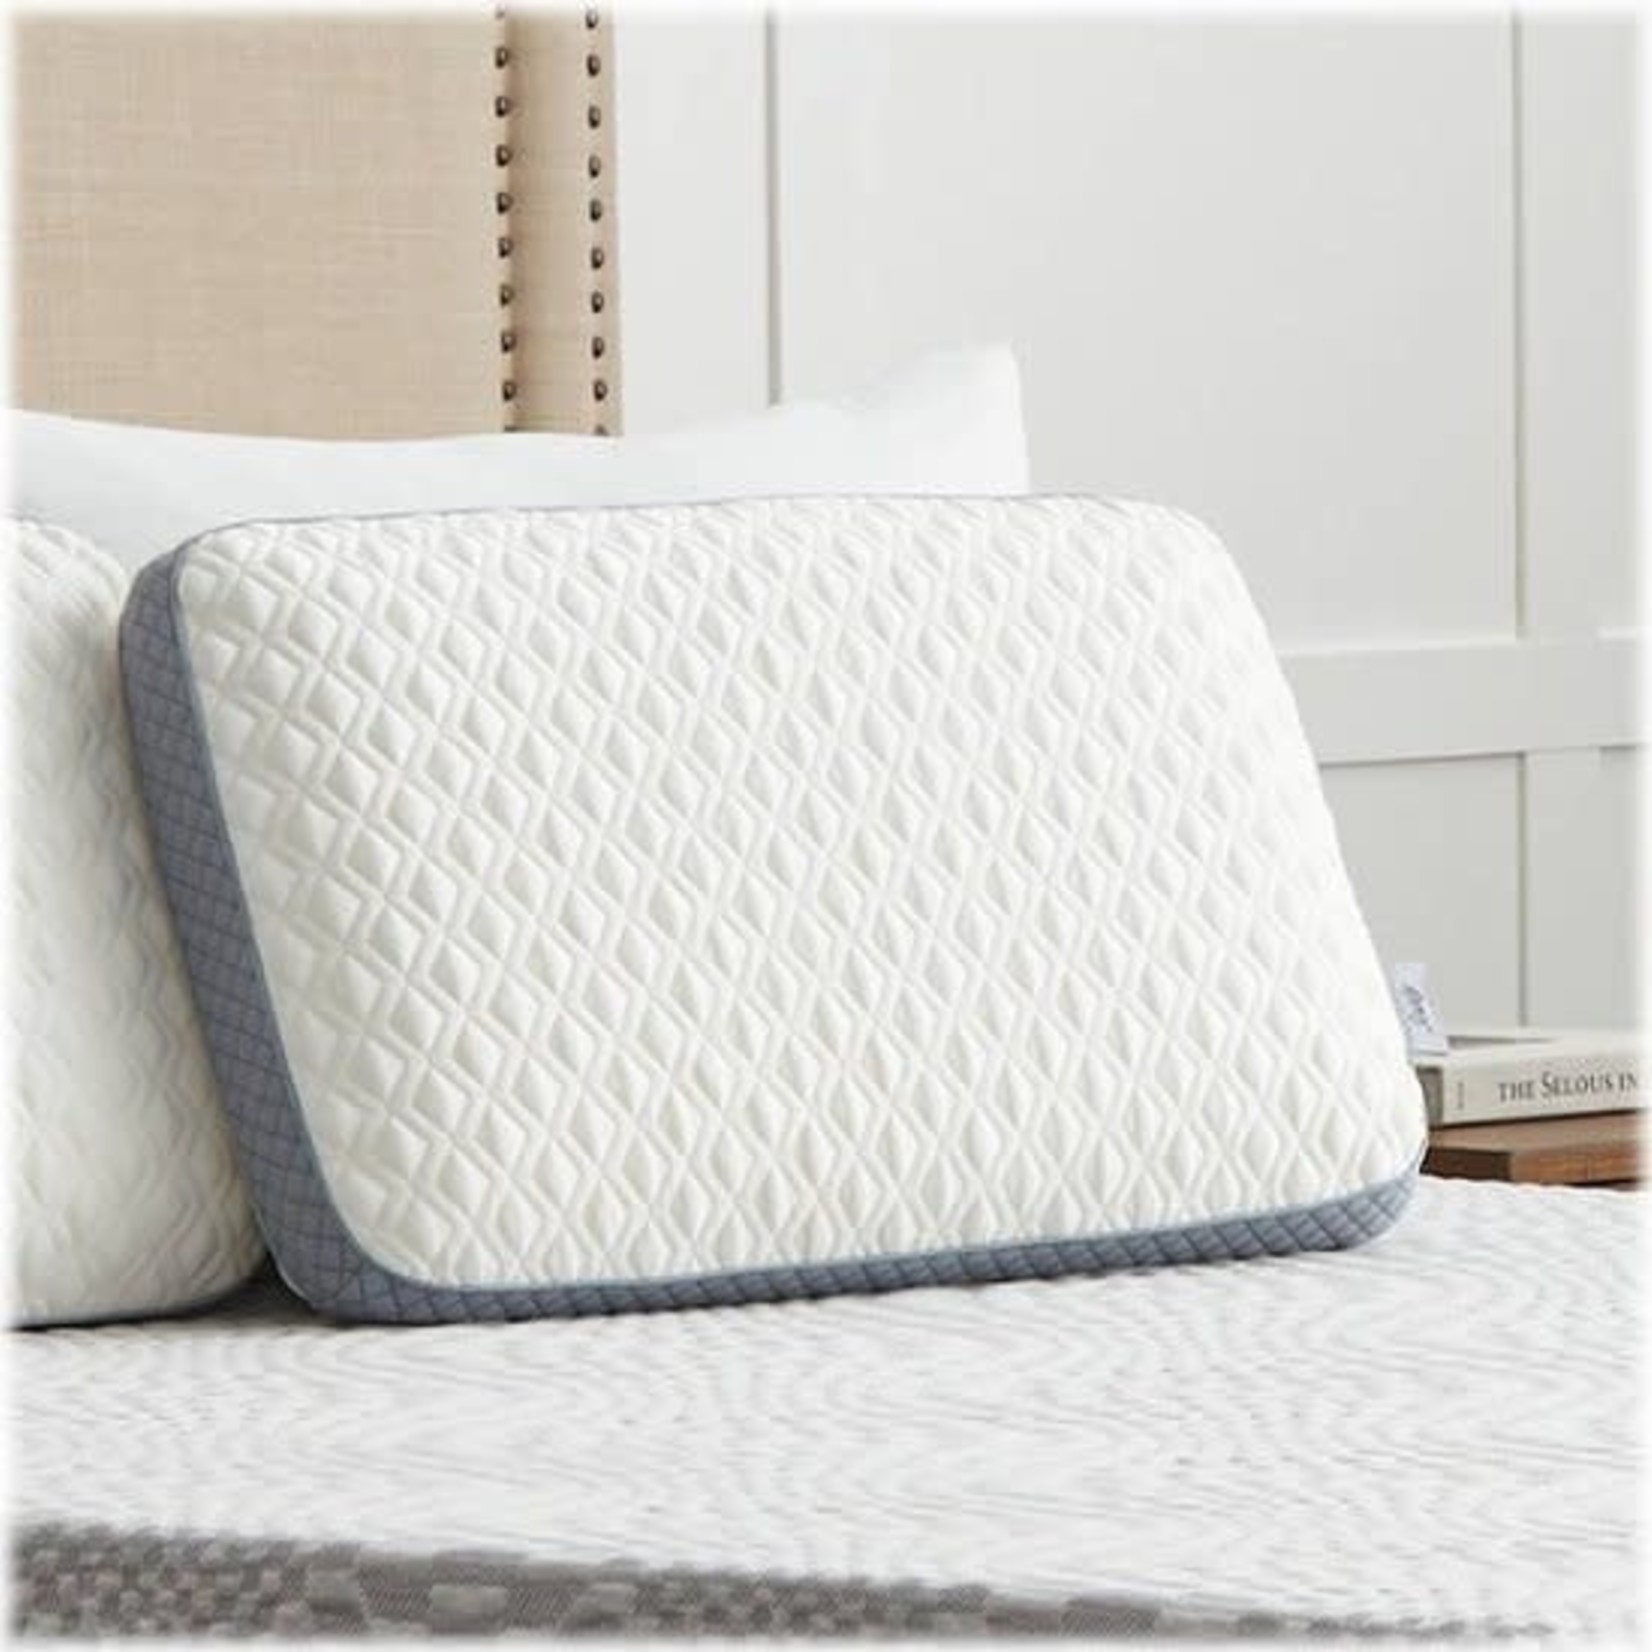 Sealy Bed Pillow- Memory Foam- Gray White